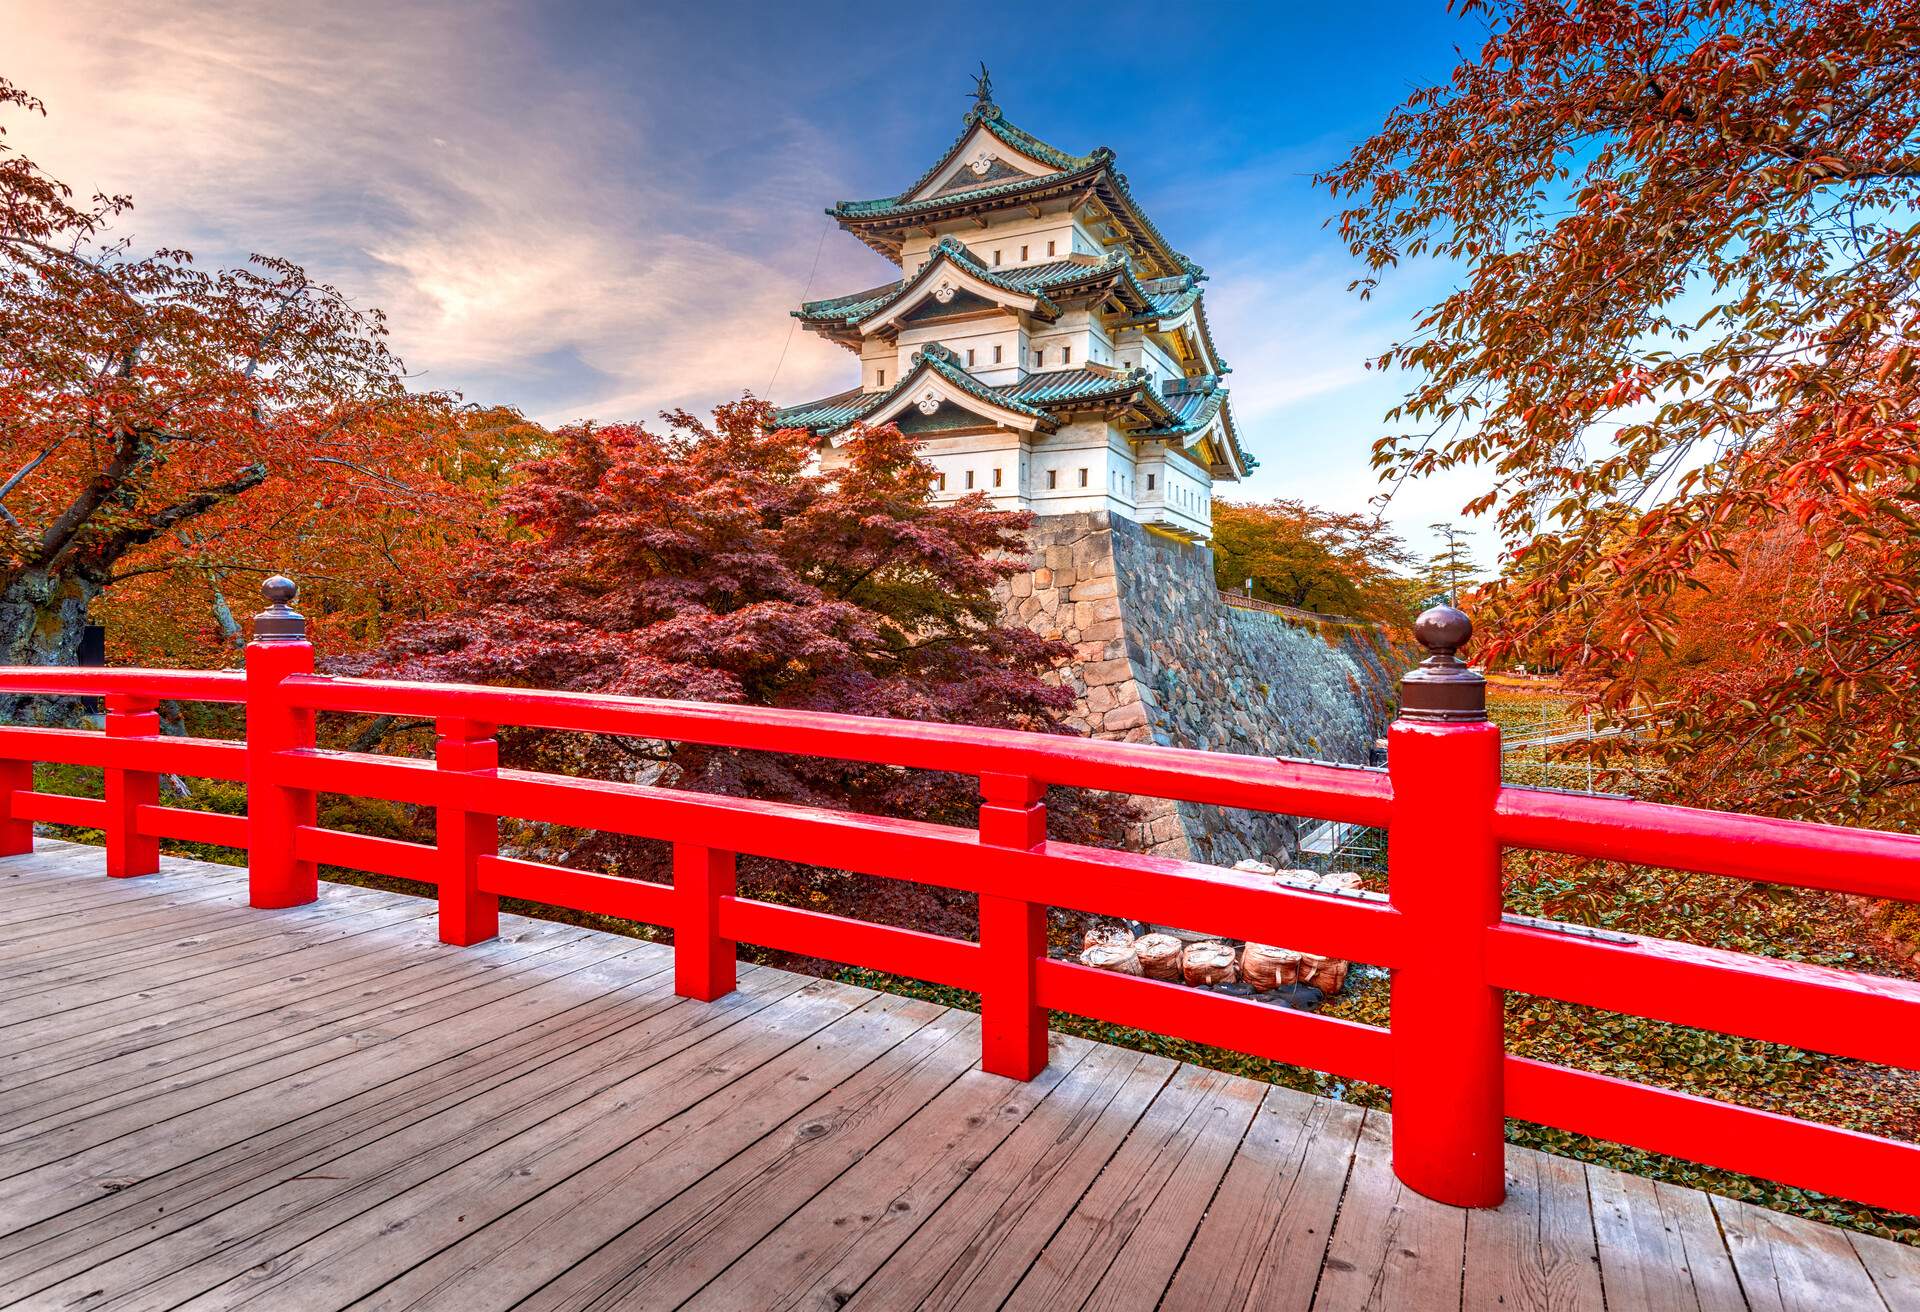 A wooden bridge with red railings over a moat backdropped by a three-story Japanese castle. 